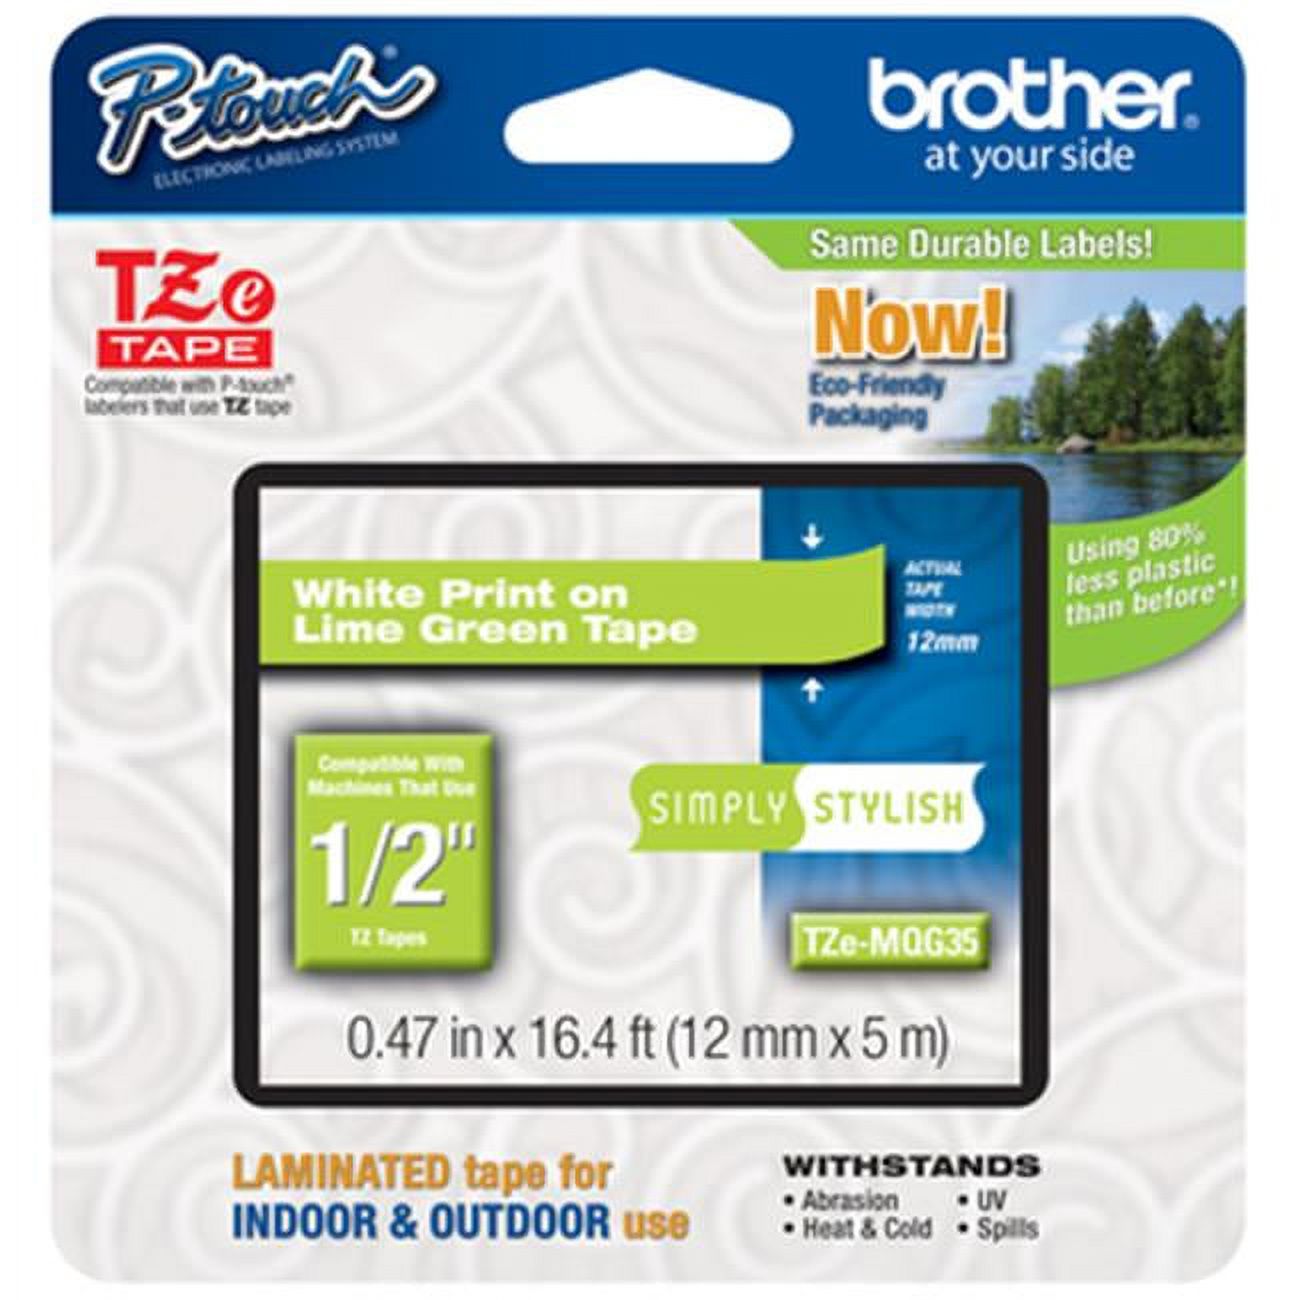 Brother Printer TZEMQG35 Touch 0.5 White On Lime Green Standard Laminated Tape - 16.4 ft. - image 1 of 2